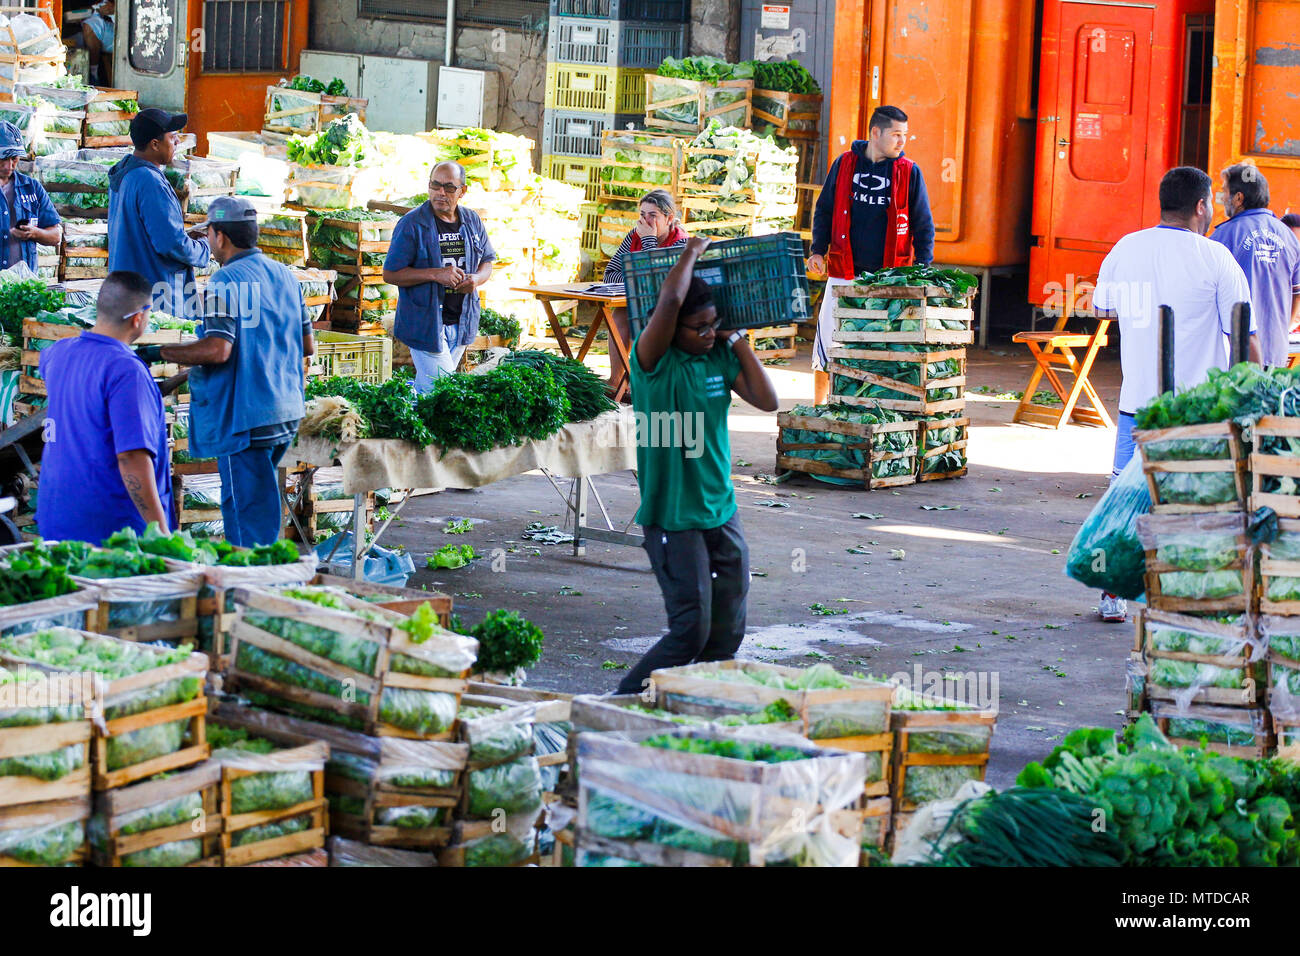 SÃO PAULO, SP - 29.05.2018: MOVIMENTO NO CEAGESP NESTA TERÇA FEIRA - After  9 days of truck stoppage, vegetable and vegetable loading begins to be  replaced in the boxes of Ceagesp, west